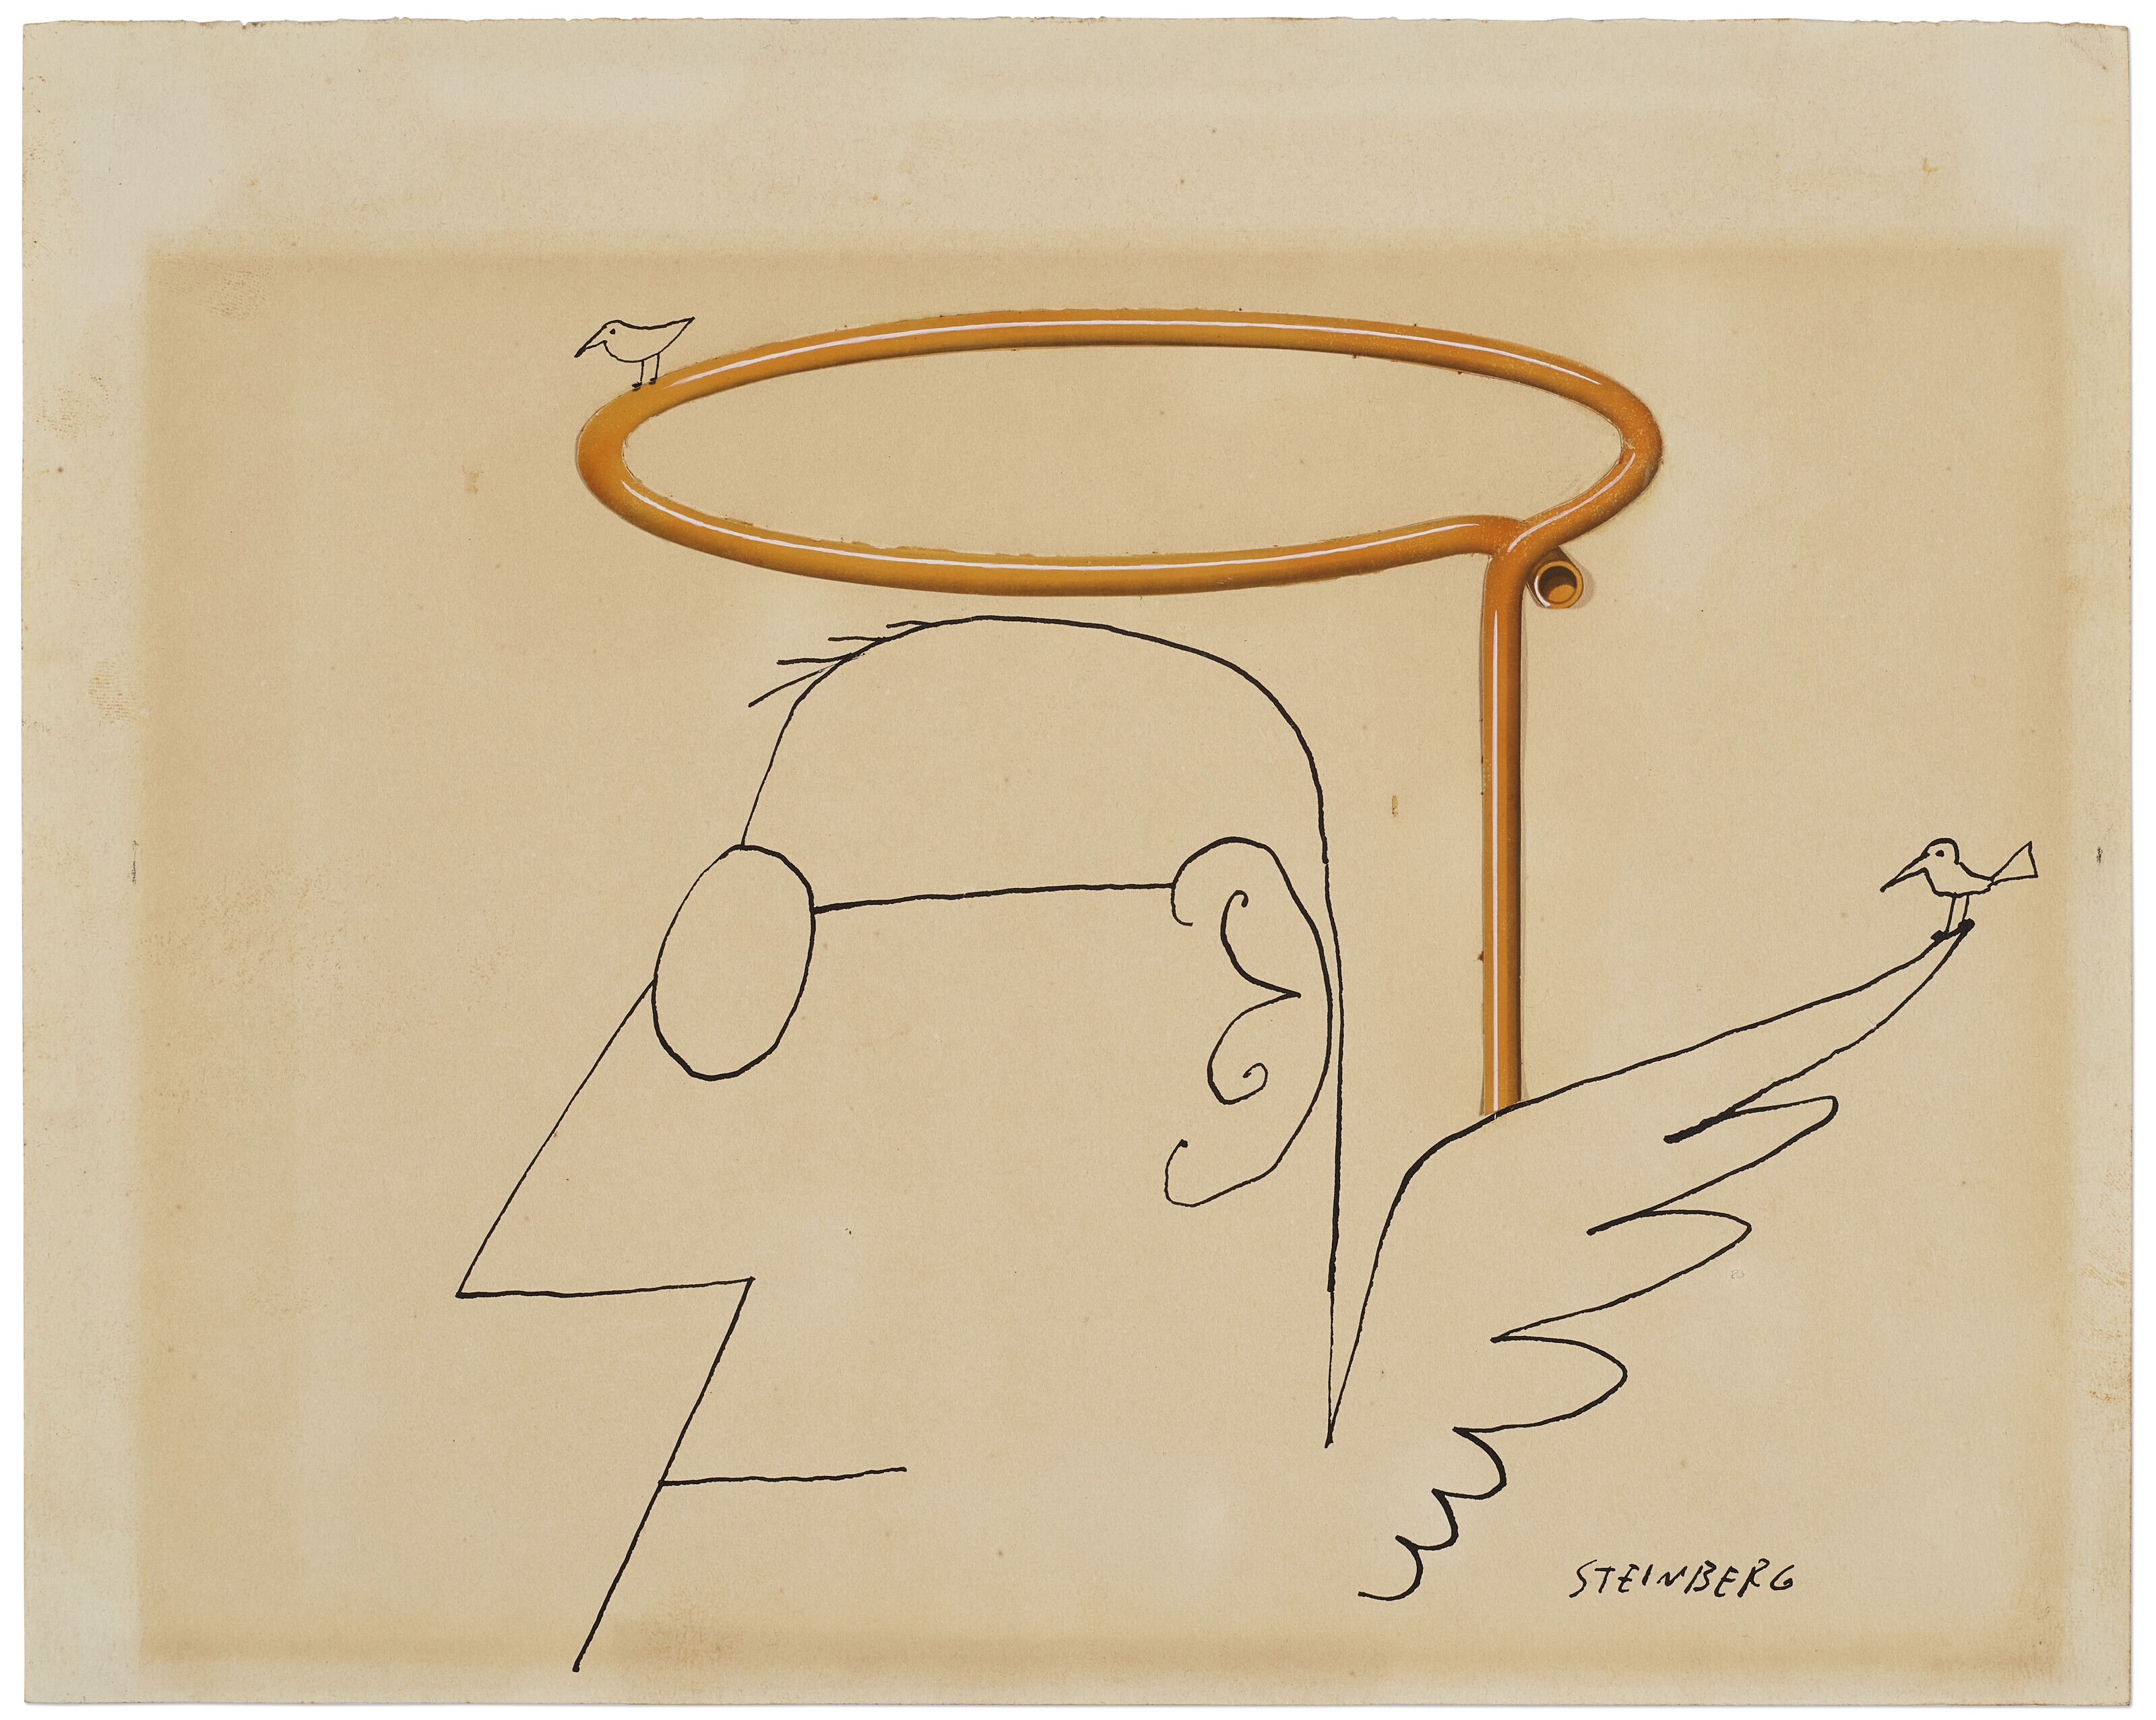 Untitled by Saul Steinberg, Executed in 1956